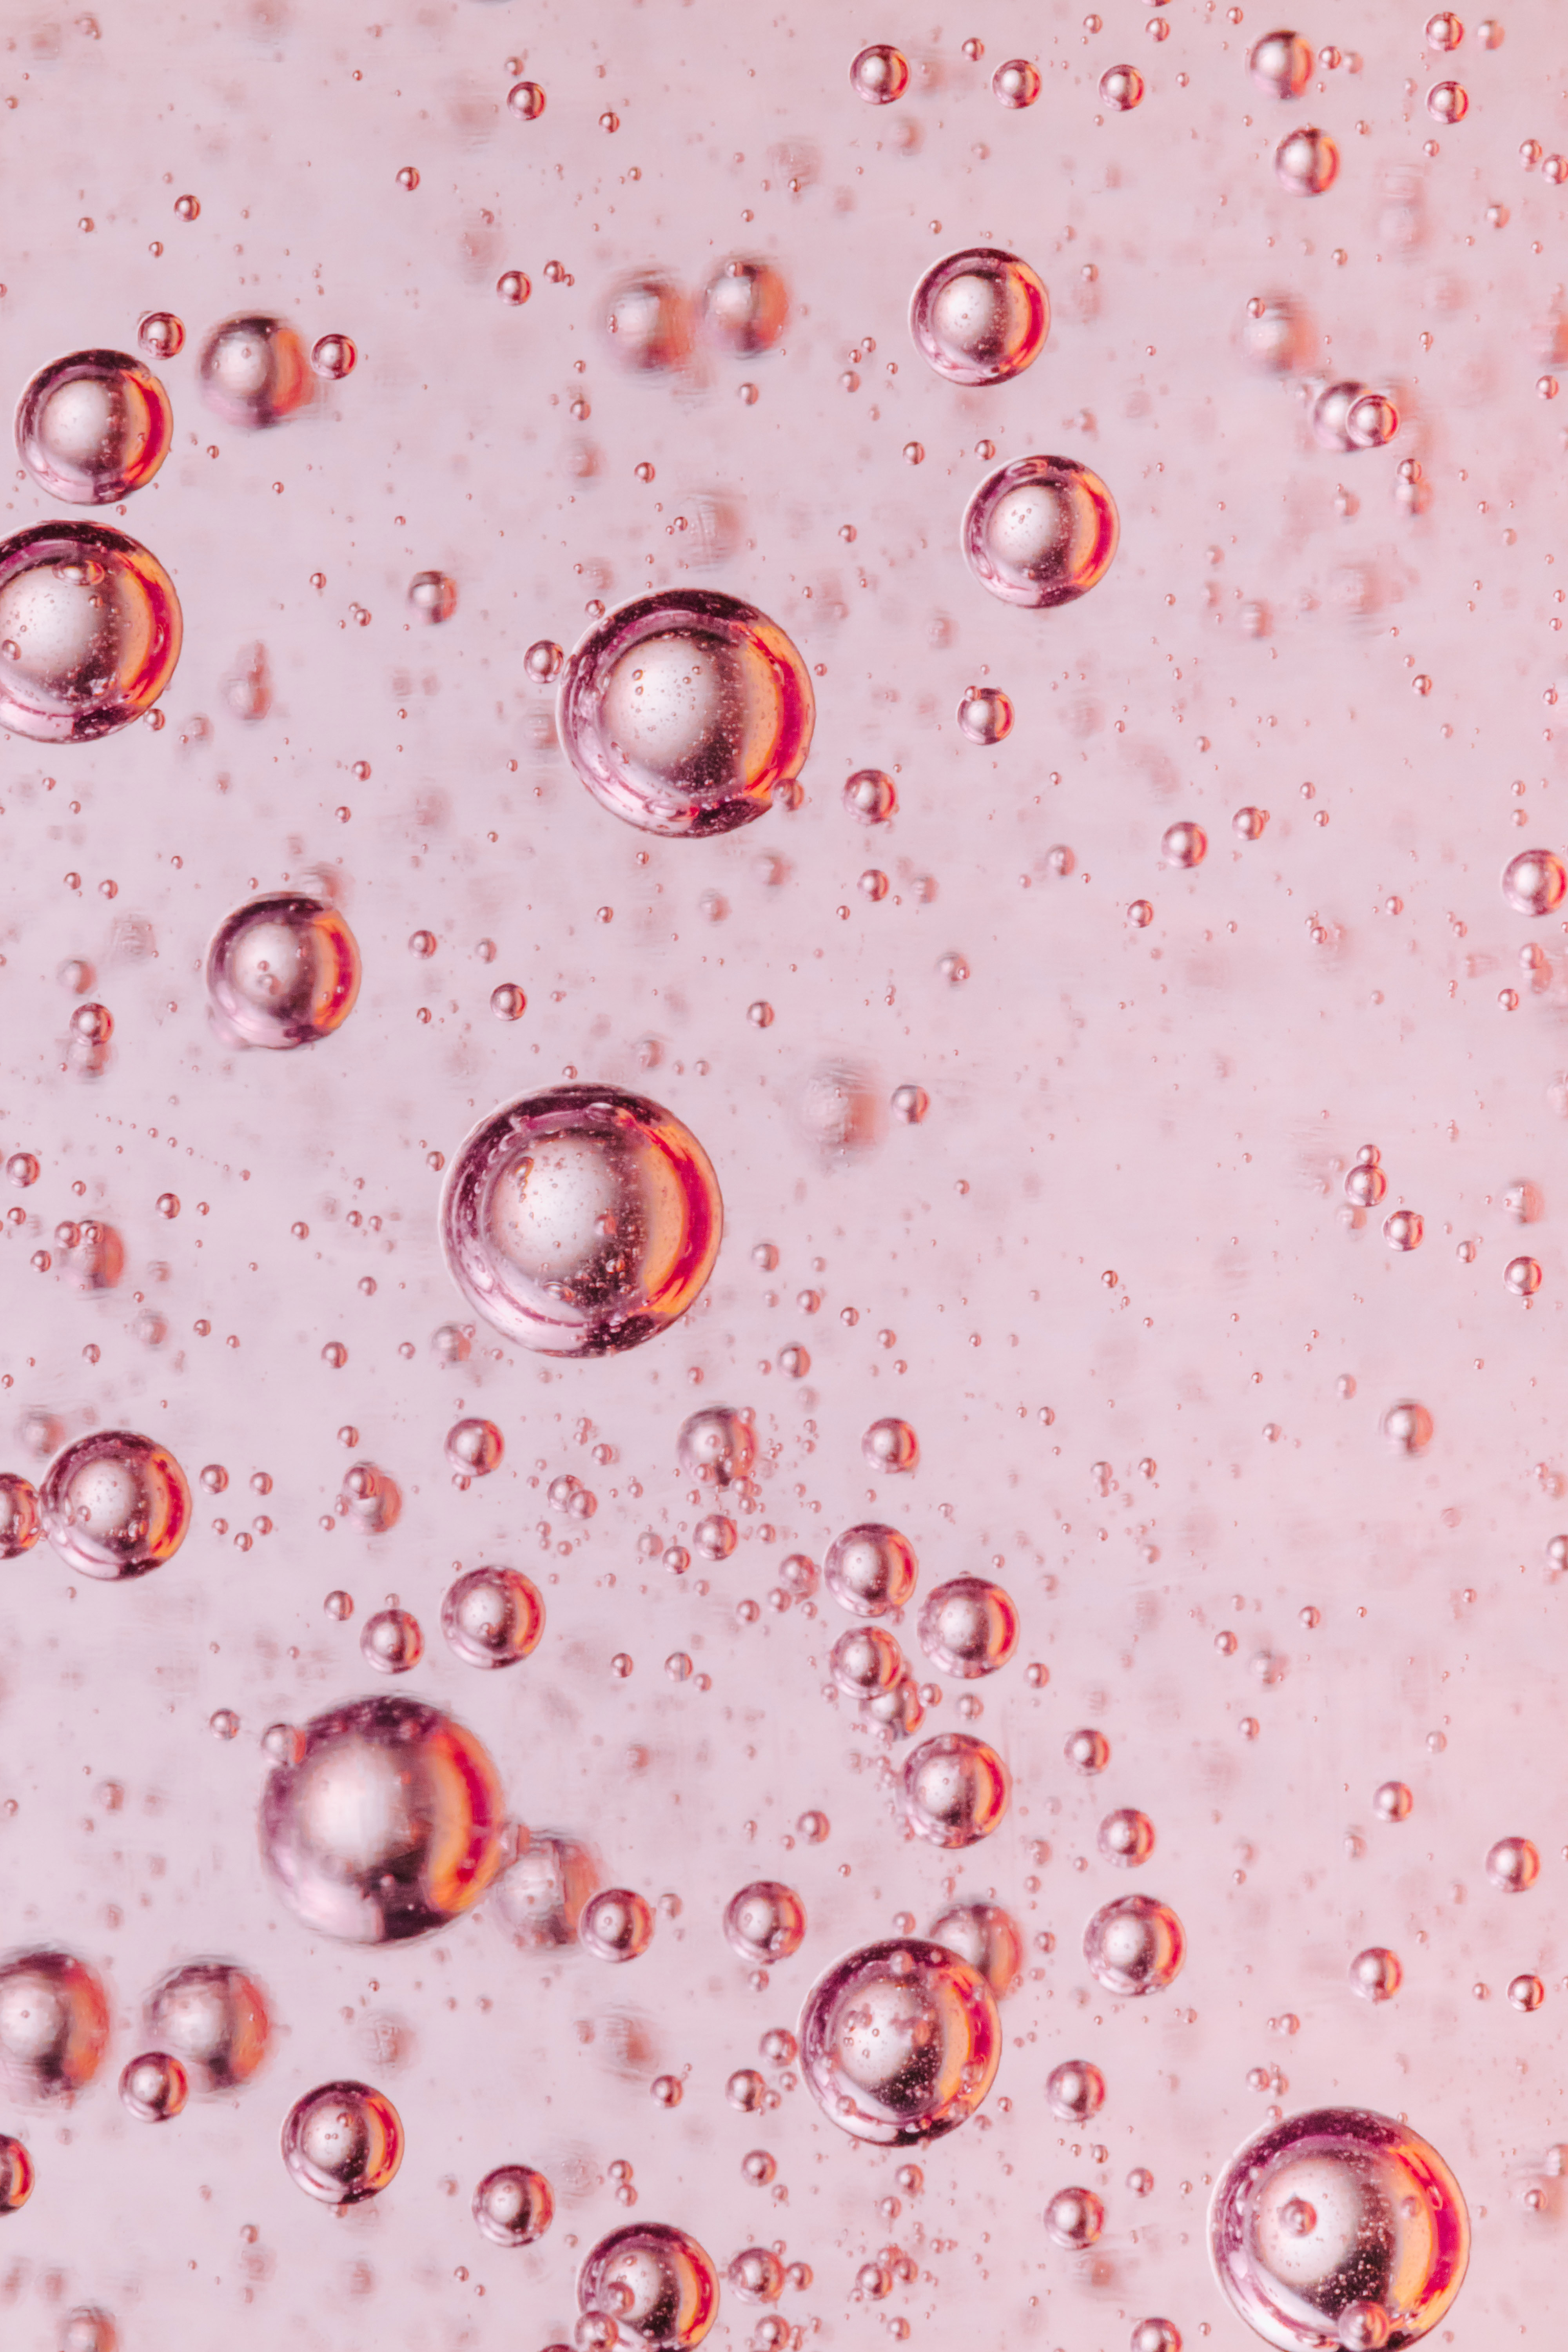 125274 download wallpaper liquid, bubbles, pink, macro screensavers and pictures for free